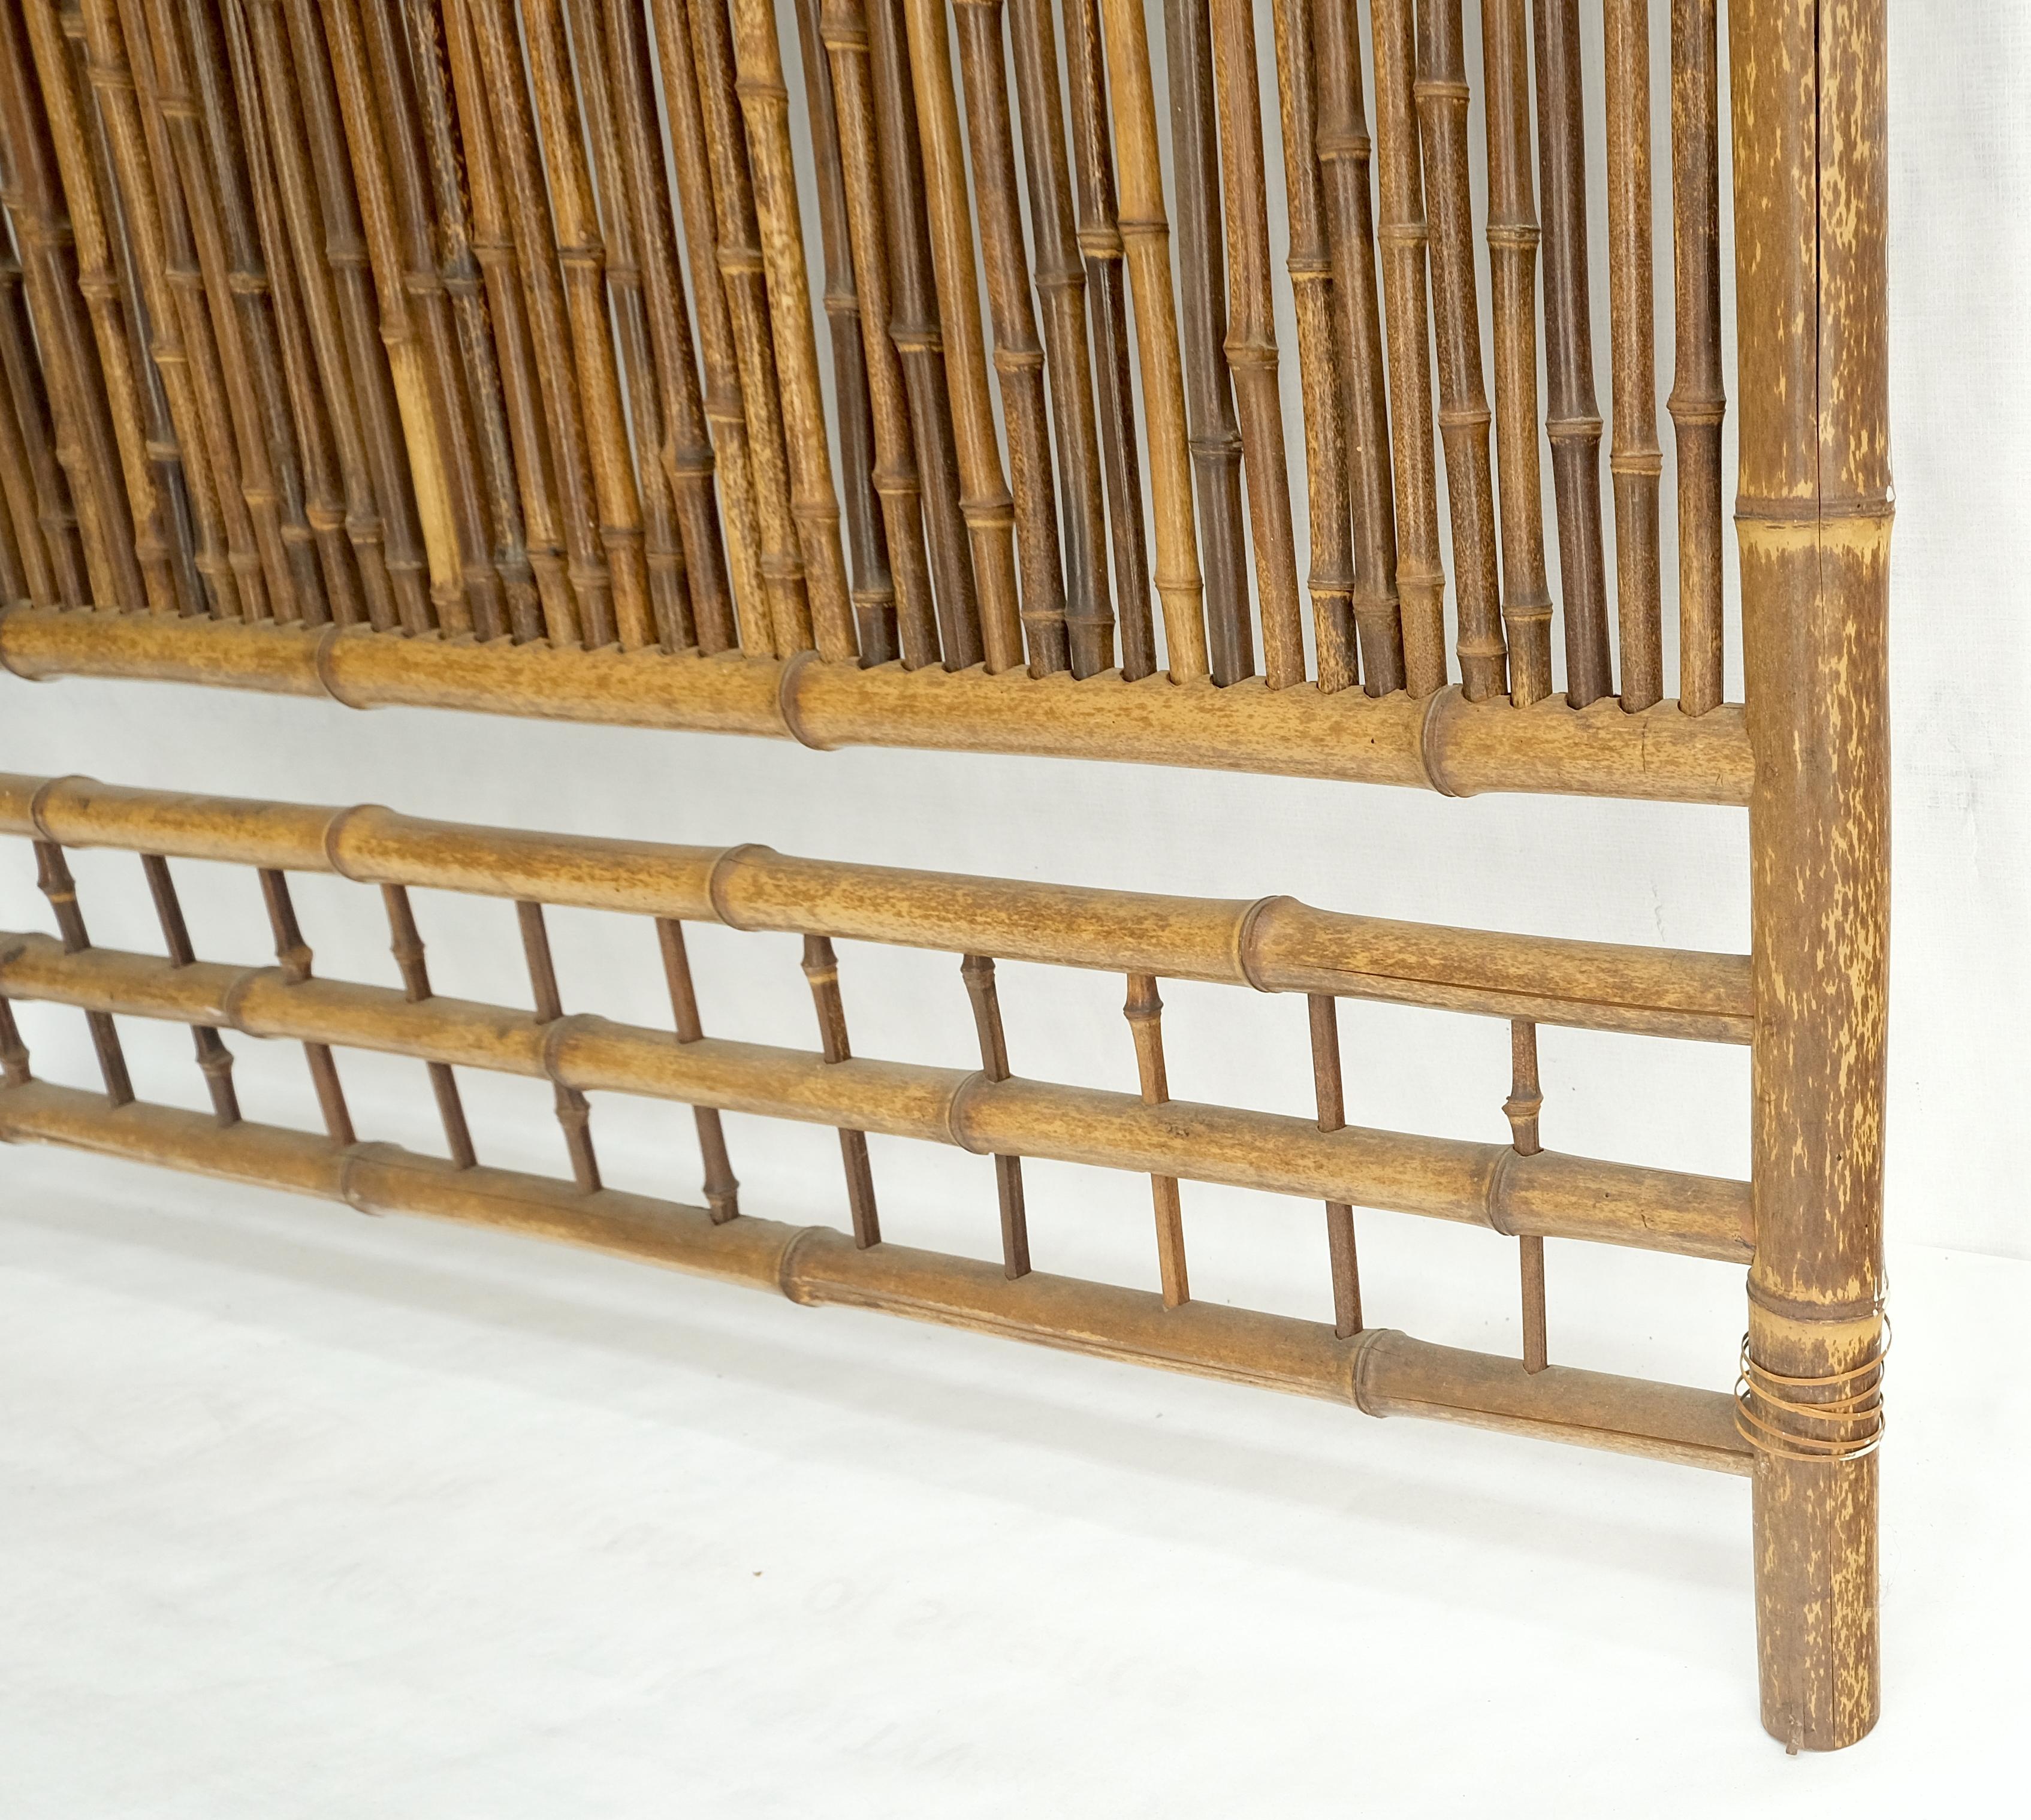 Pair of Japanese Modern Bamboo Room Dividers Screens Decorative Panels Wall Art For Sale 4